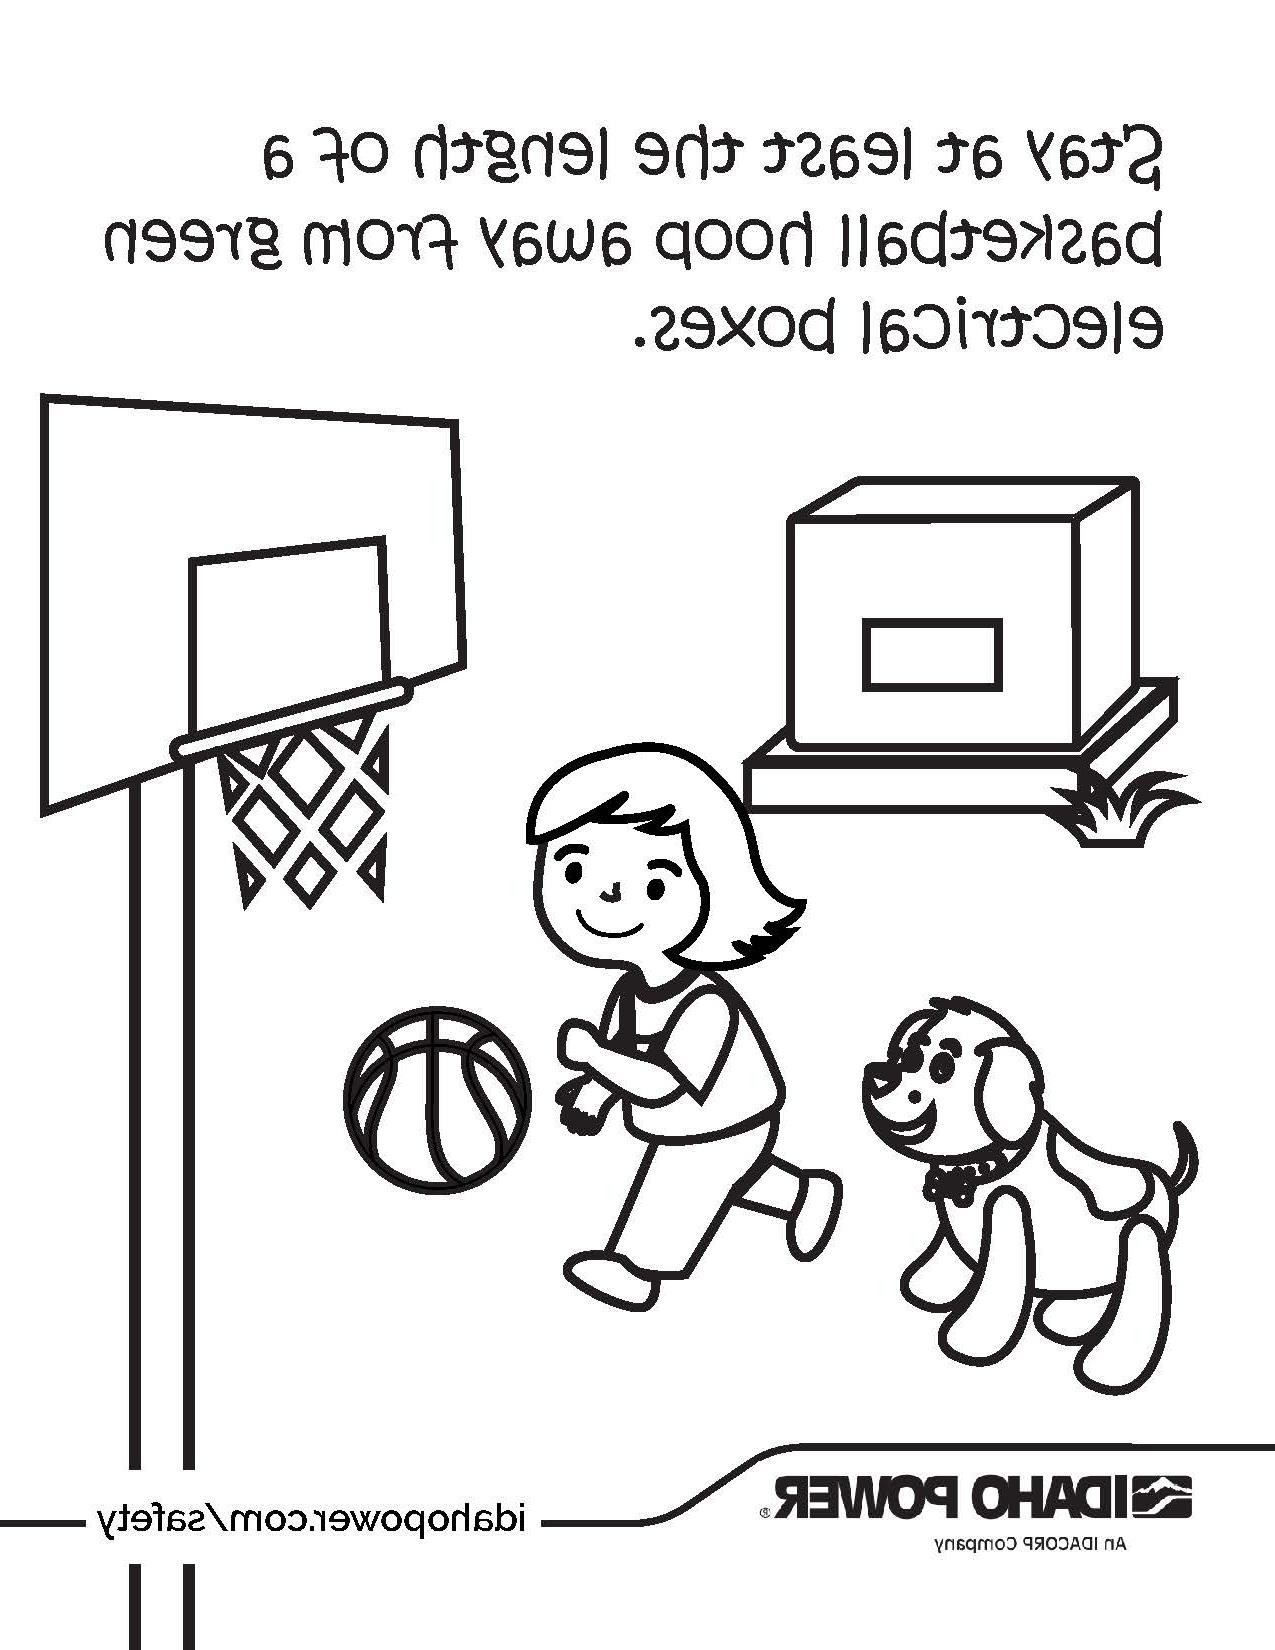 Coloring page of a girl playing basketball that says, Stay at least the length of a basketball hoop away from green electrical boxes